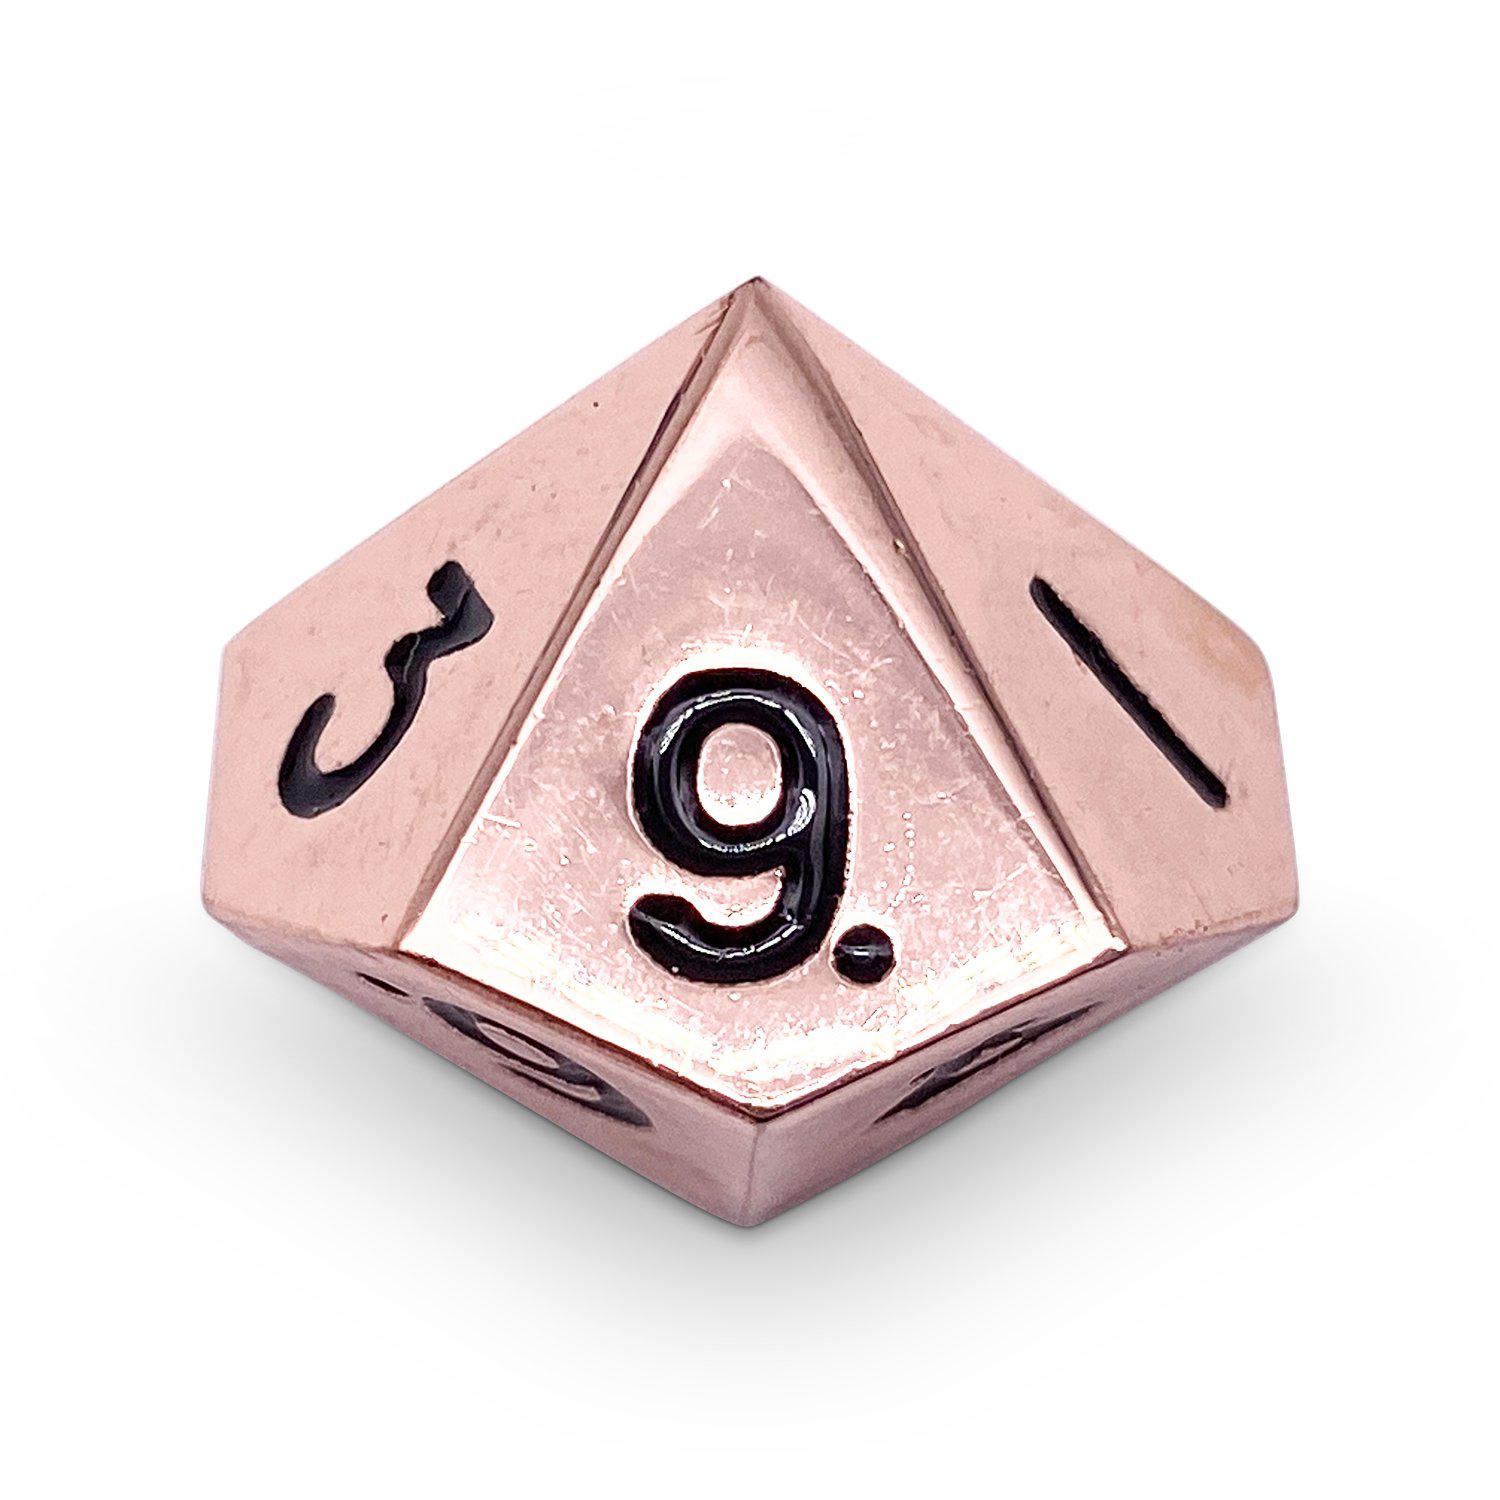 Single Alloy D10 in Copper Still by Norse Foundry - NOR 04507